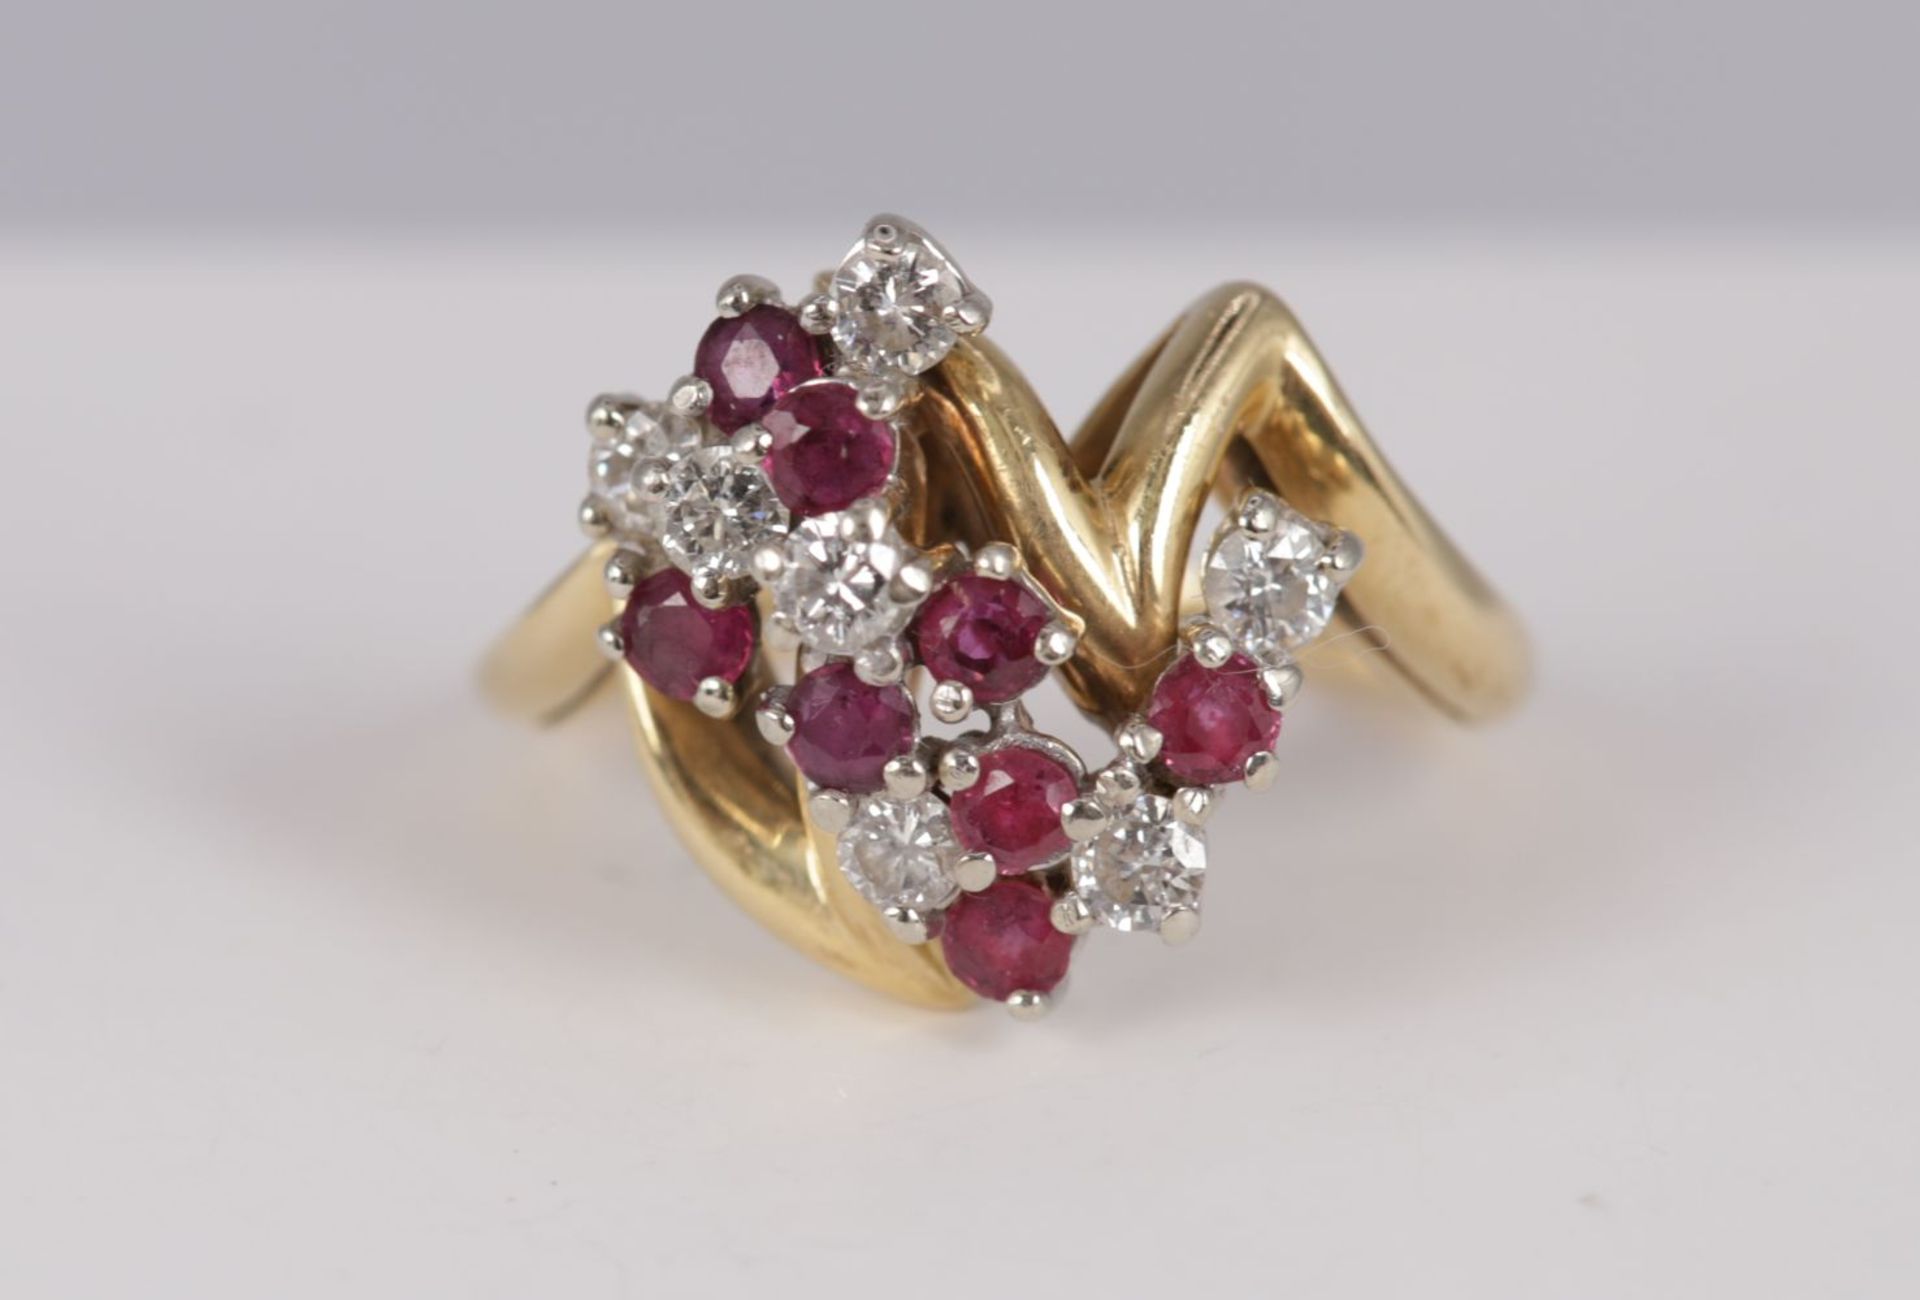 14K GOLD, DIAMOND AND RUBY RING - Image 4 of 4